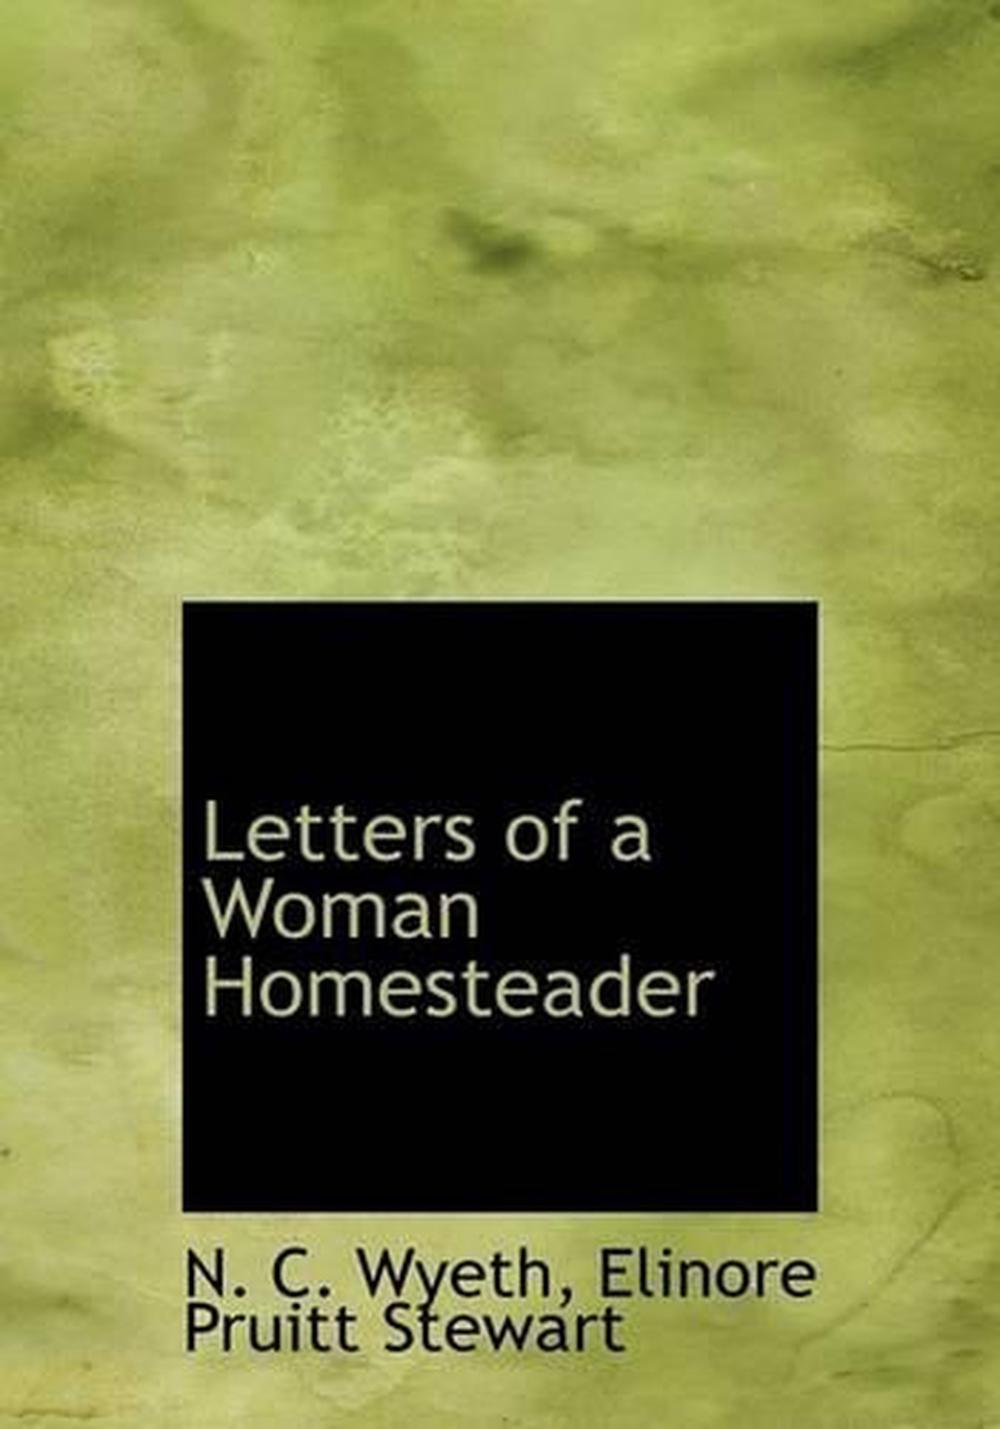 letters of a woman homesteader